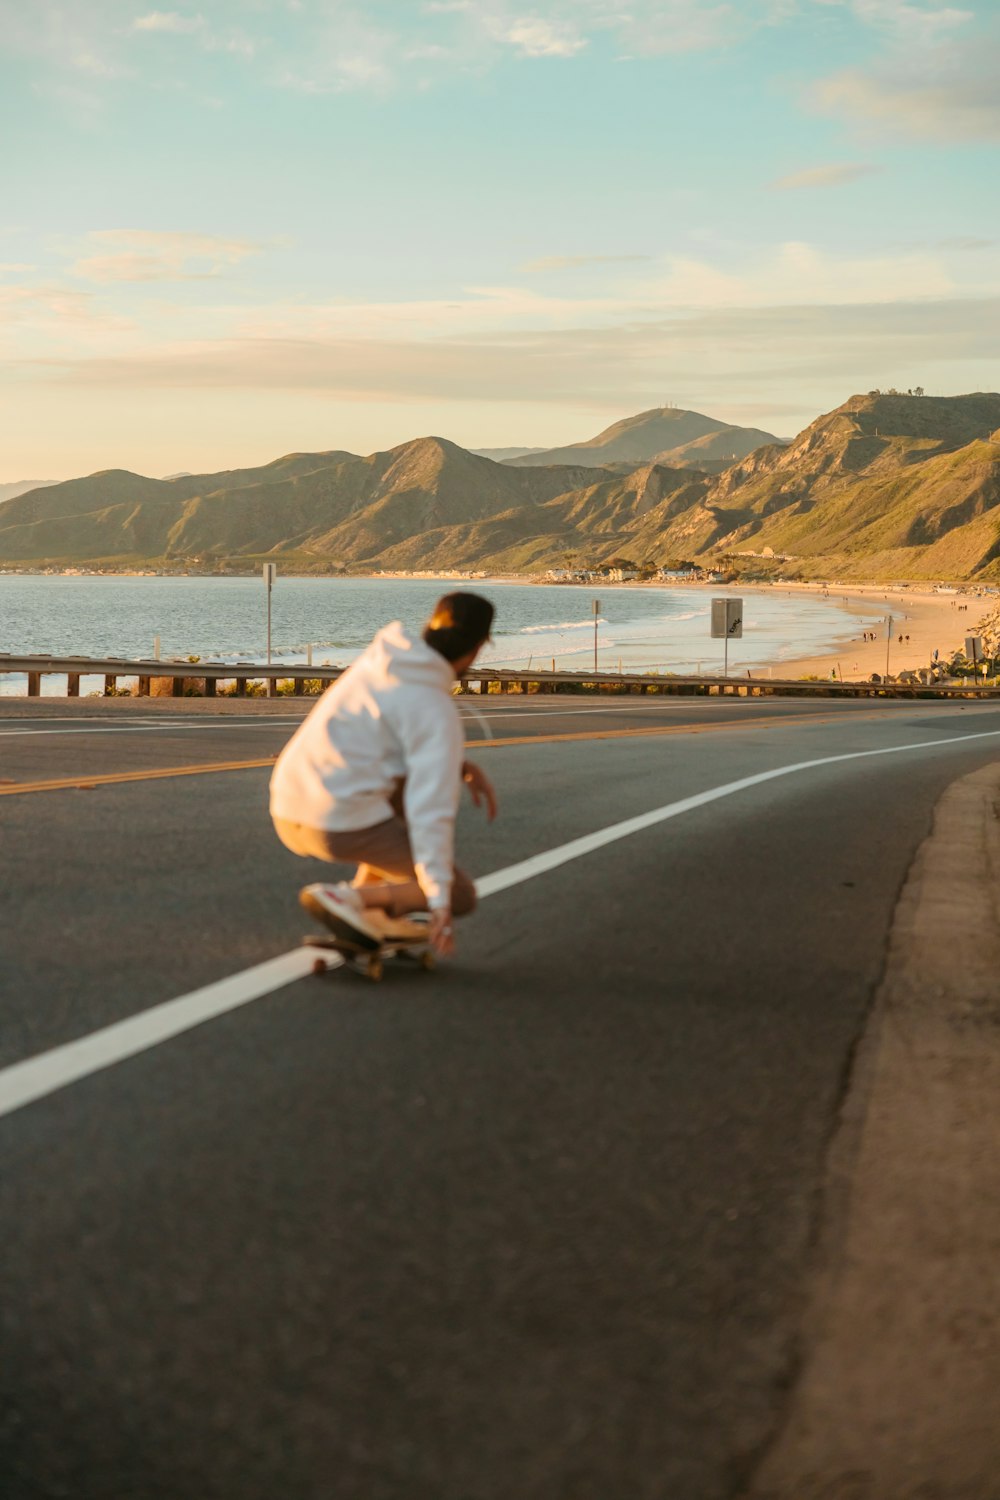 a man riding a skateboard down the middle of a road